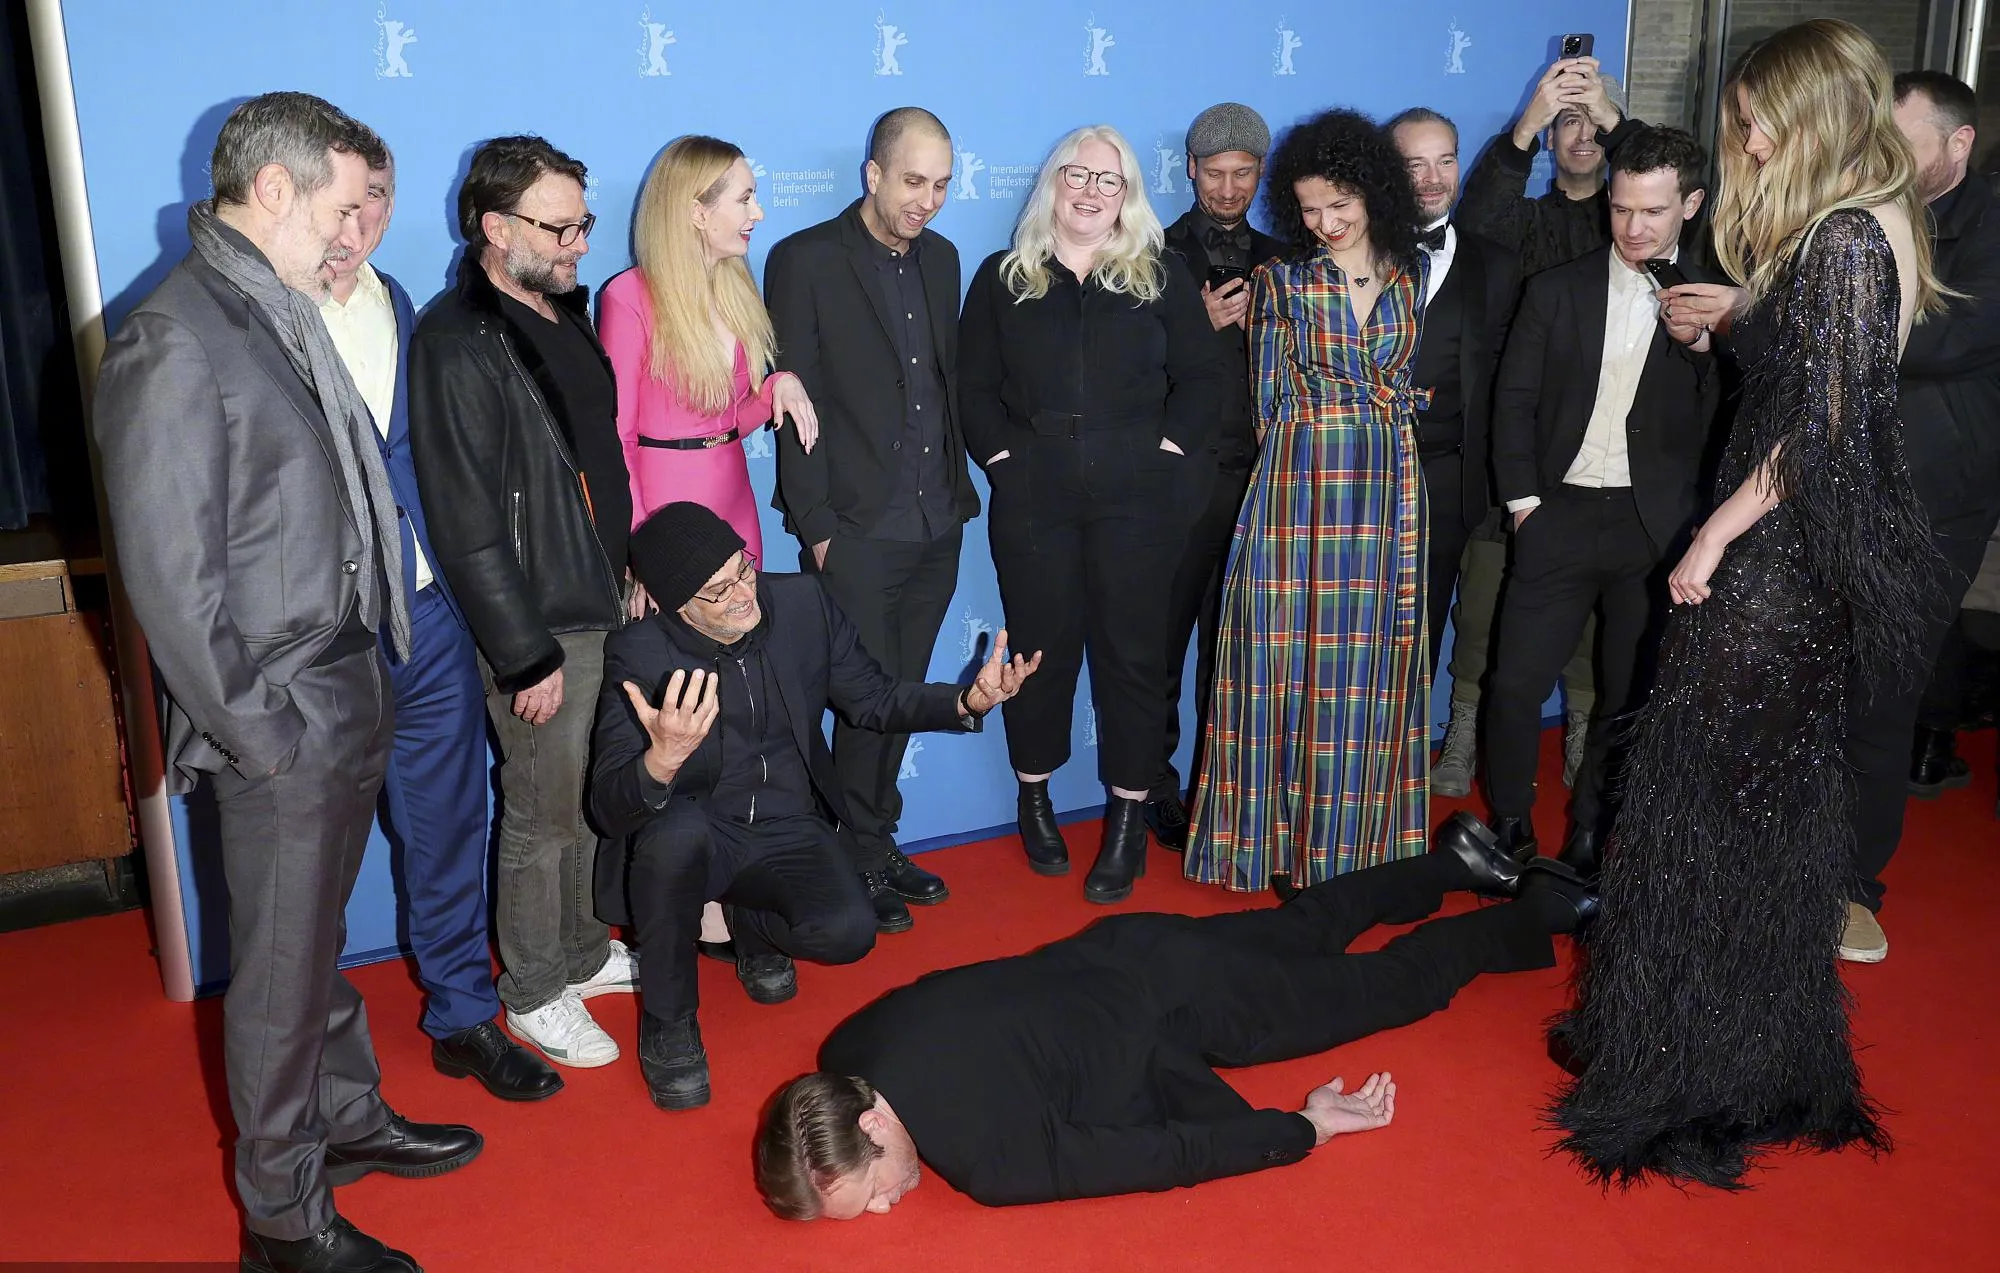 New film 'Infinity Pool' premiere red carpet and press conference images at 2023 Berlin International Film Festival | FMV6